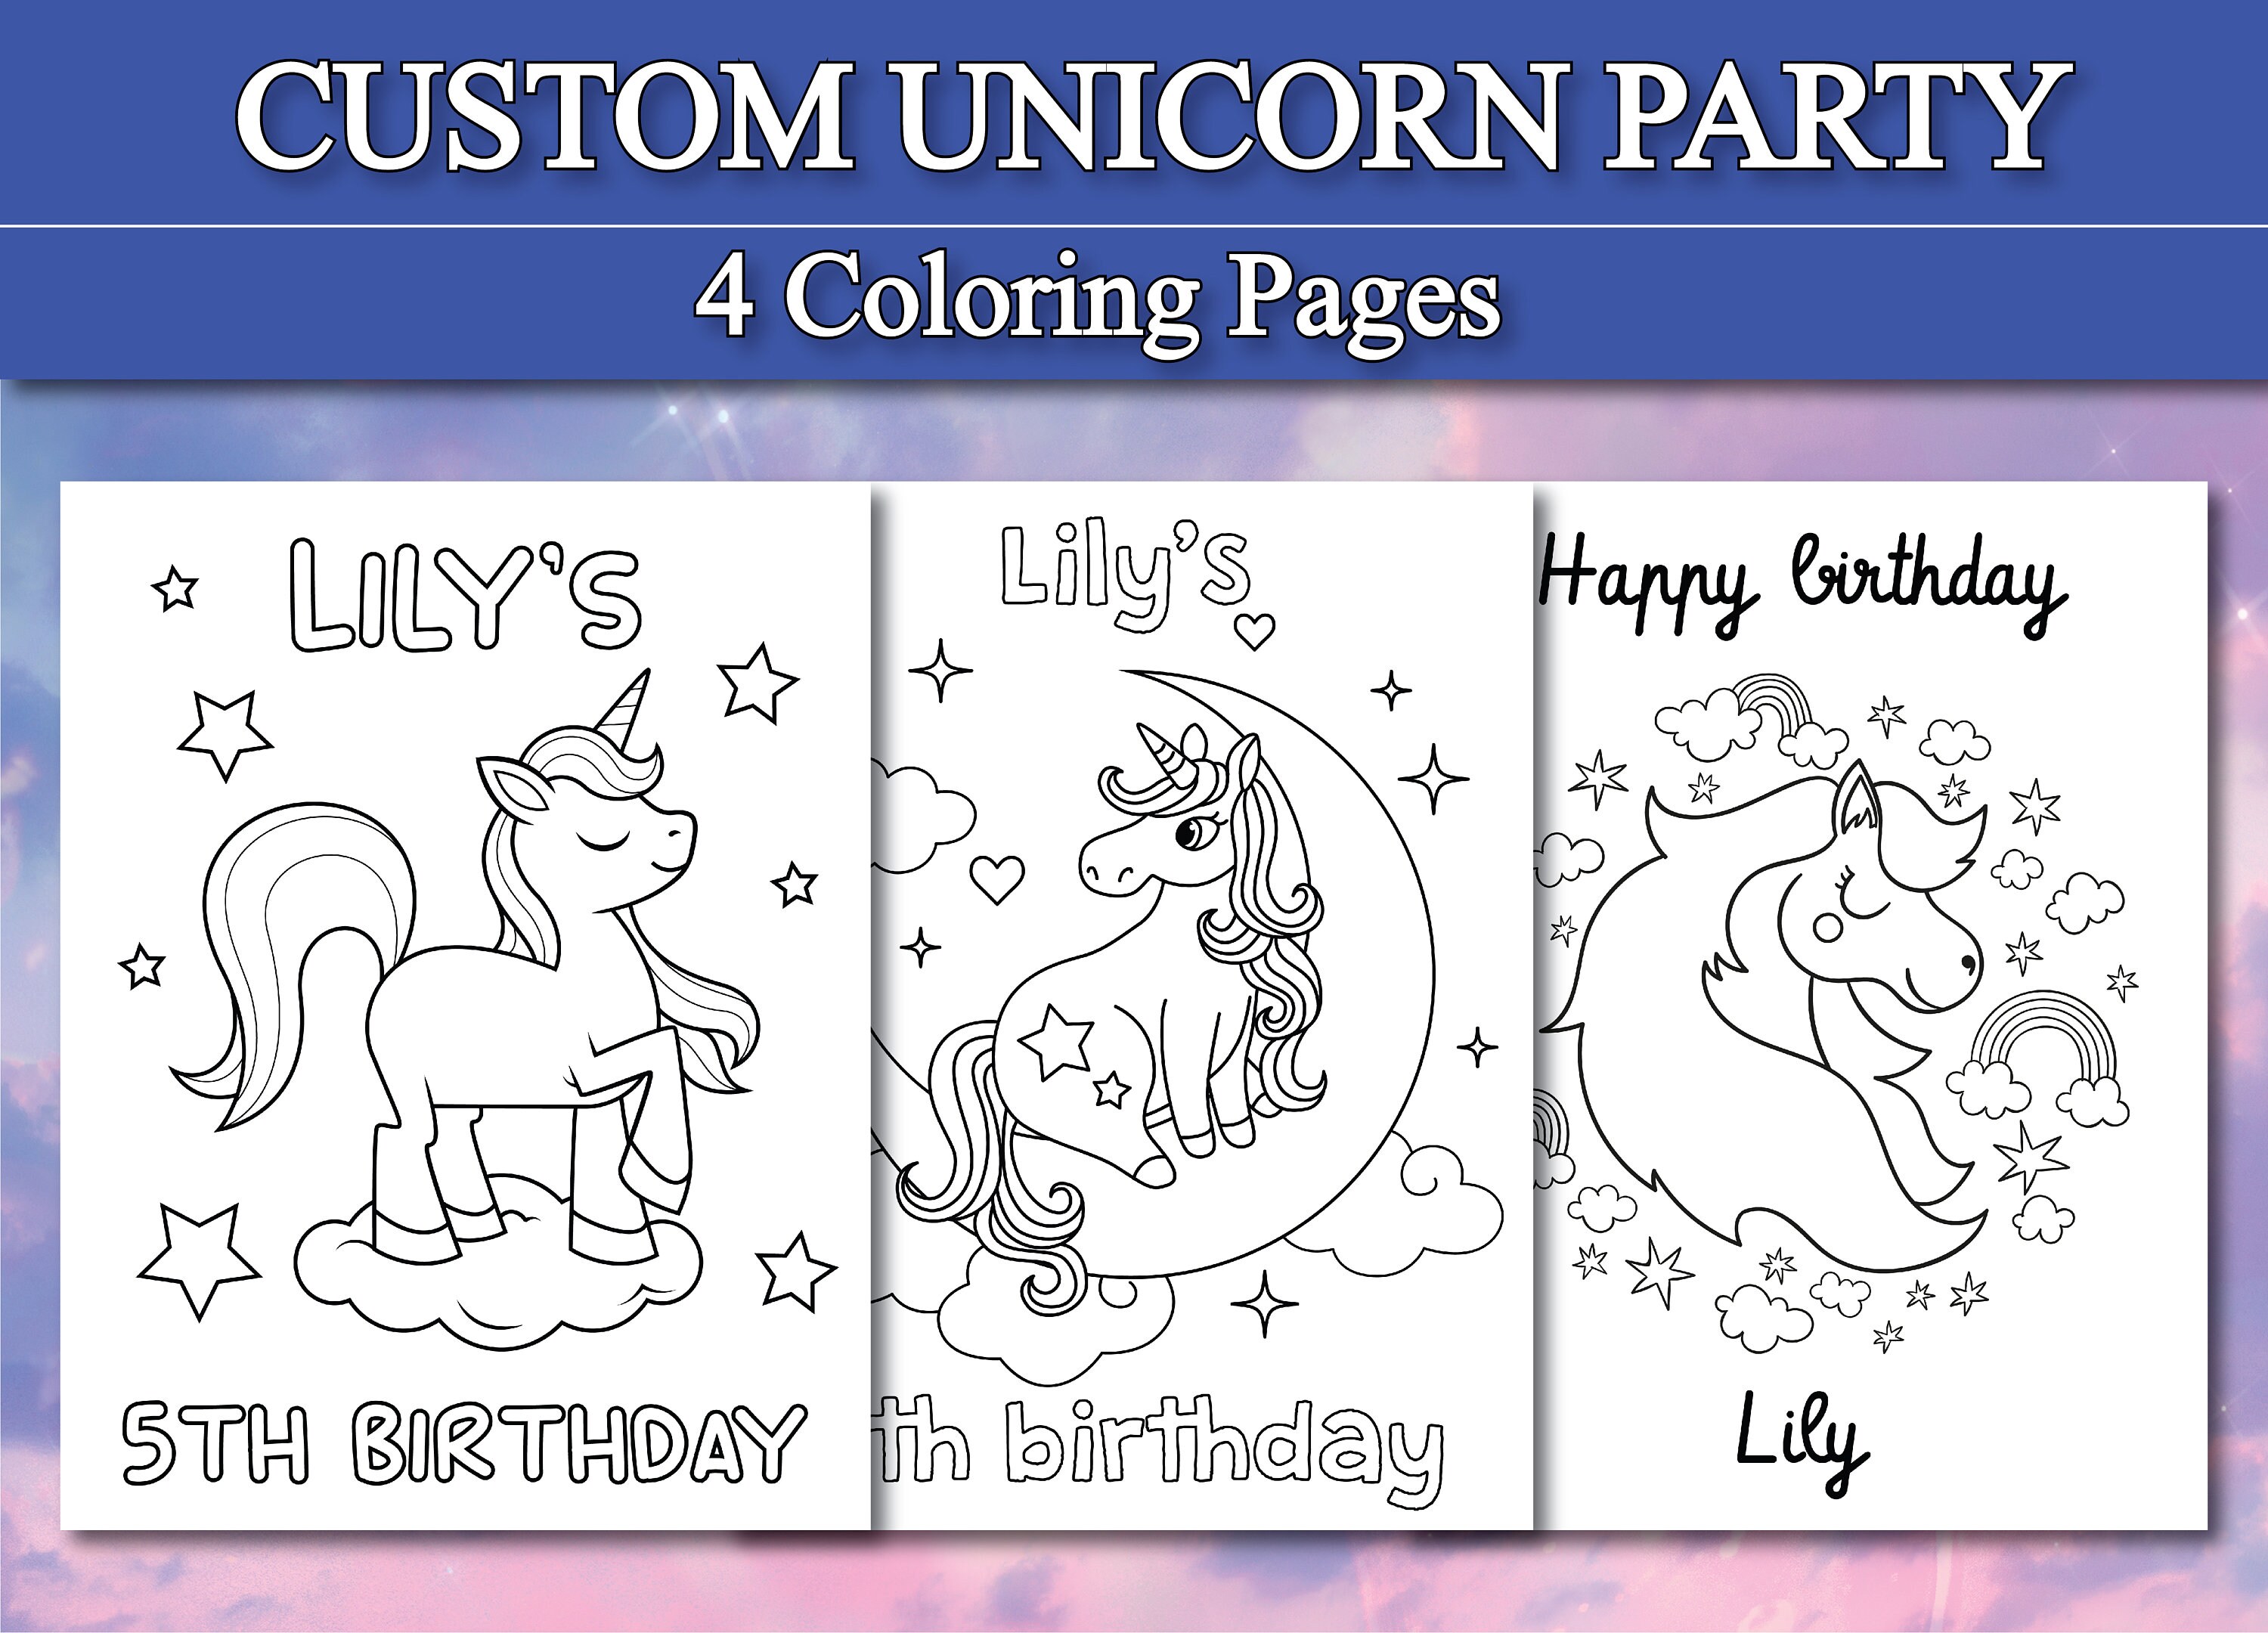 Printable: Unicorn Color by Number Activity Page for Kids Age 4 and Up 